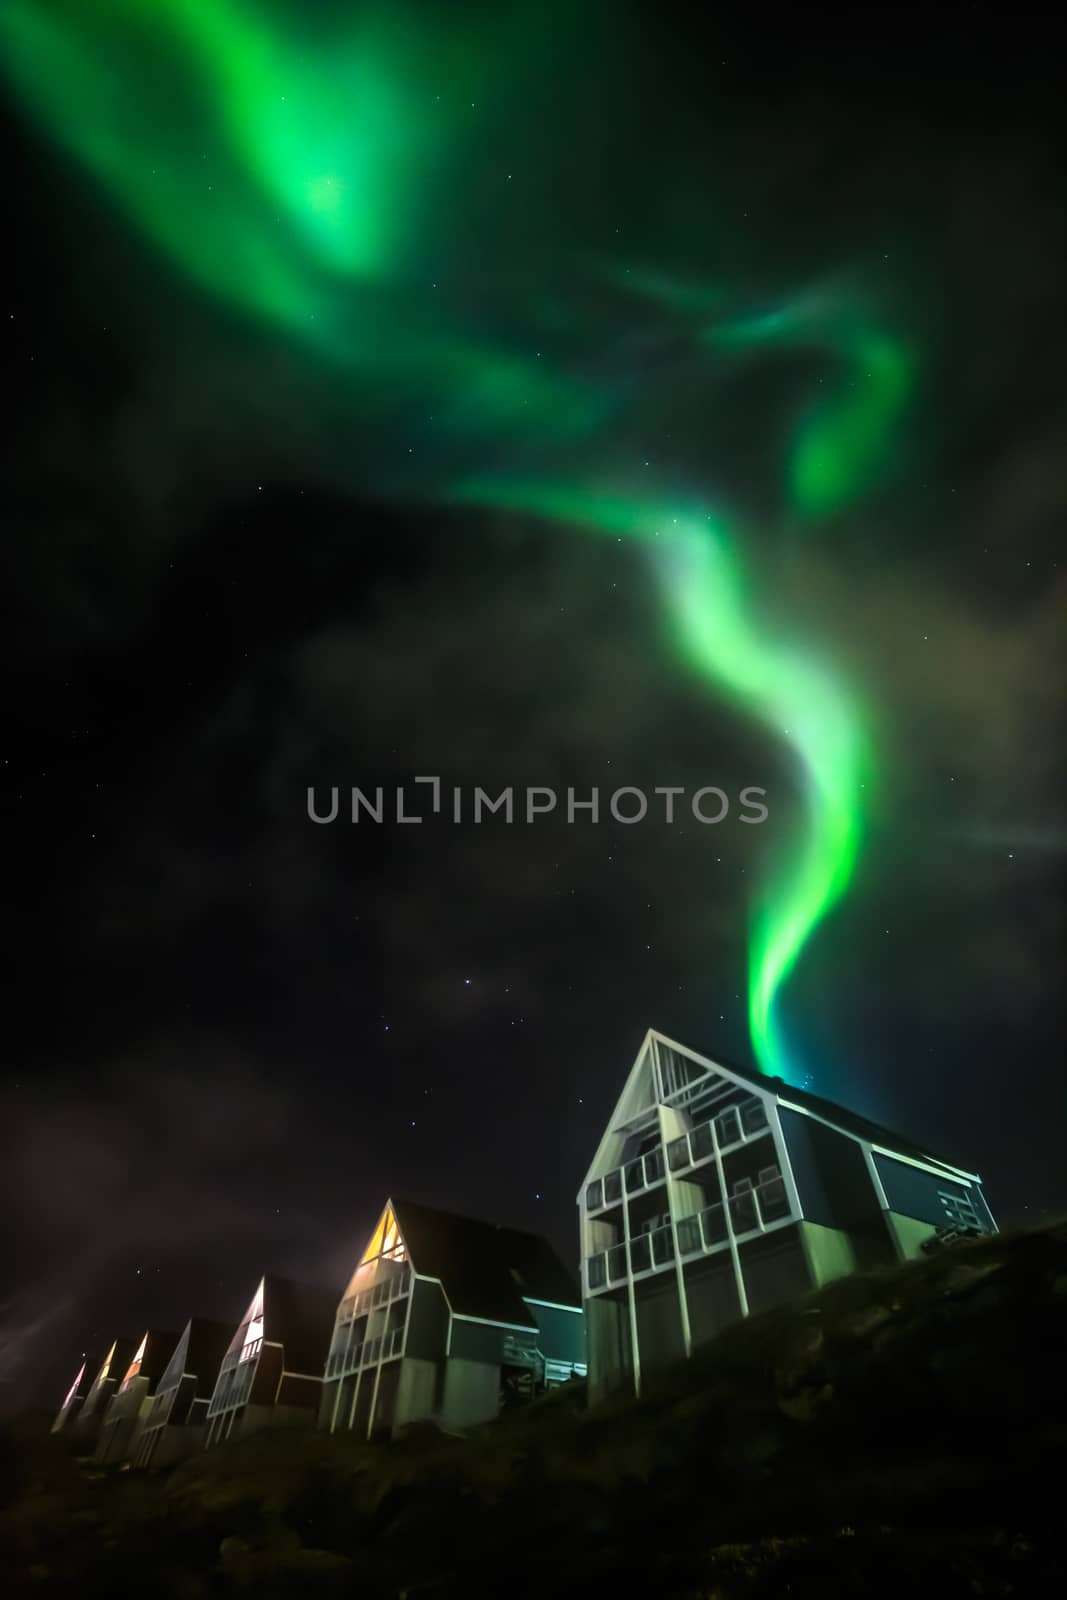 Green bright northern lights partially hidden by the clouds over Inuit living houses, Nuuk city, Greenland